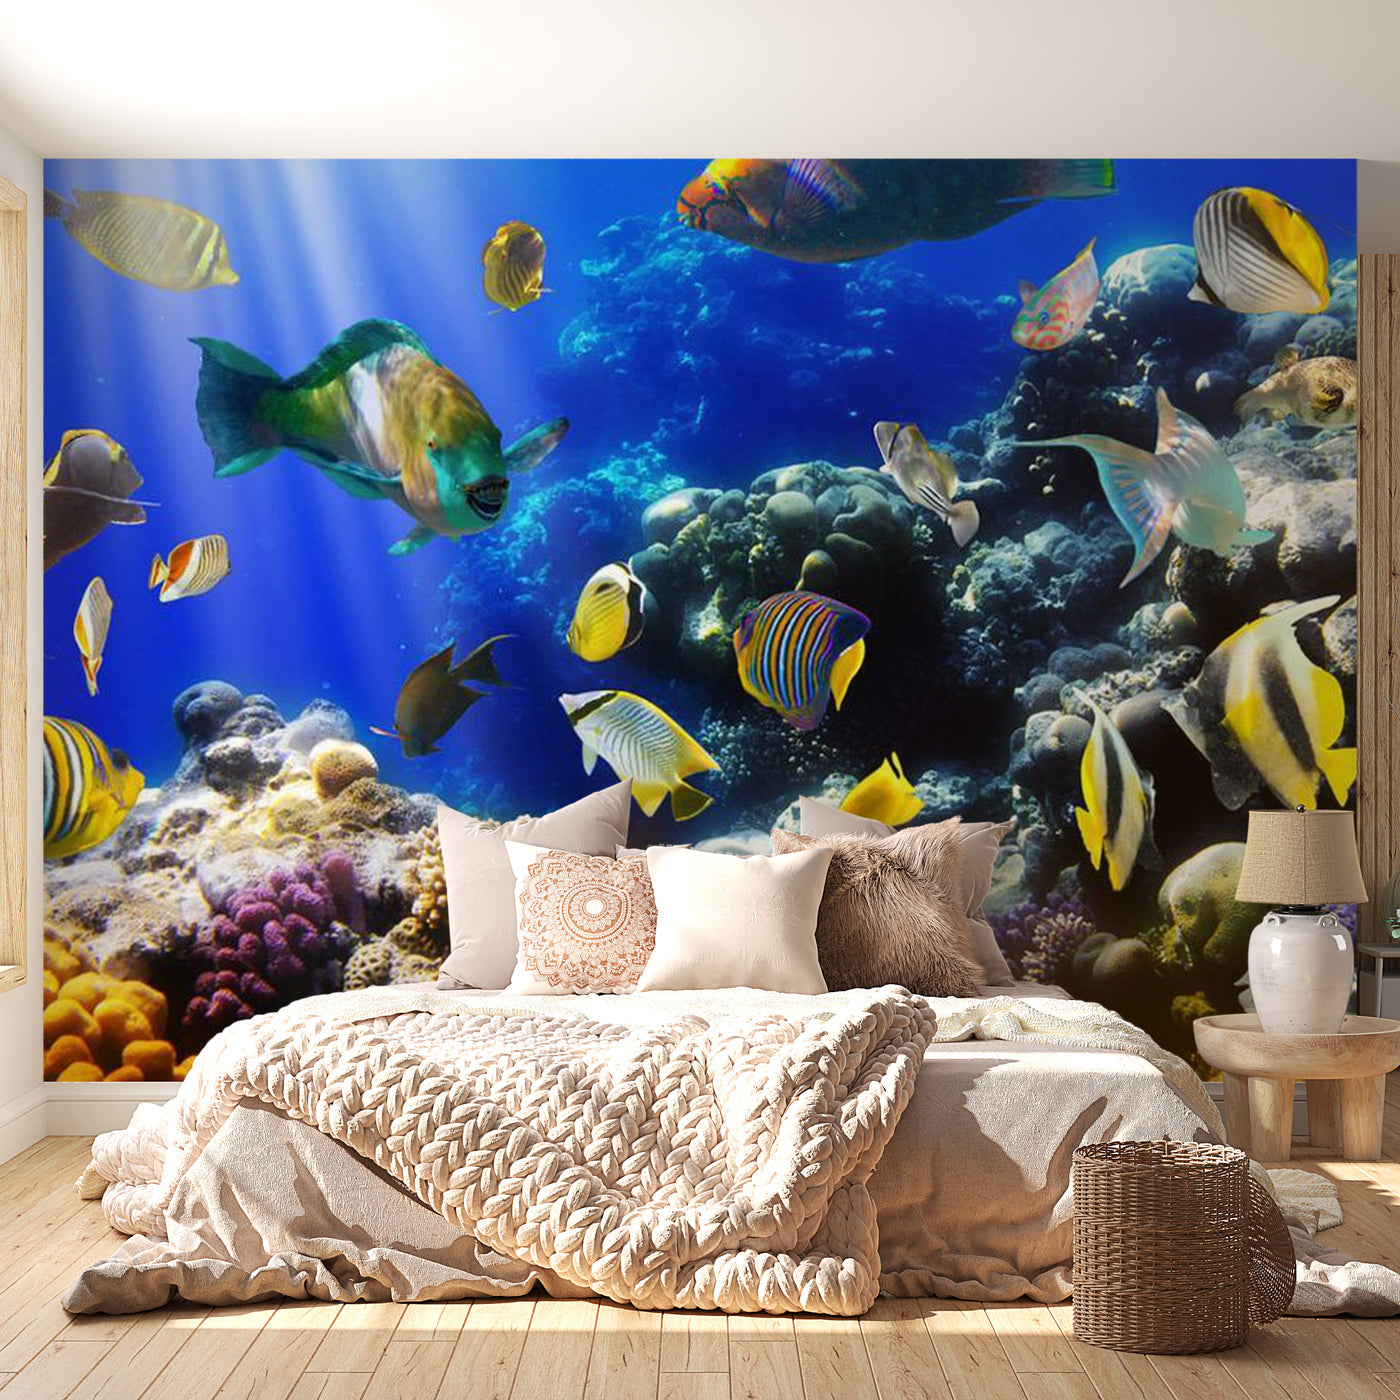 Peel & Stick Animal Wall Mural - Underwater World - Removable Wall Decals